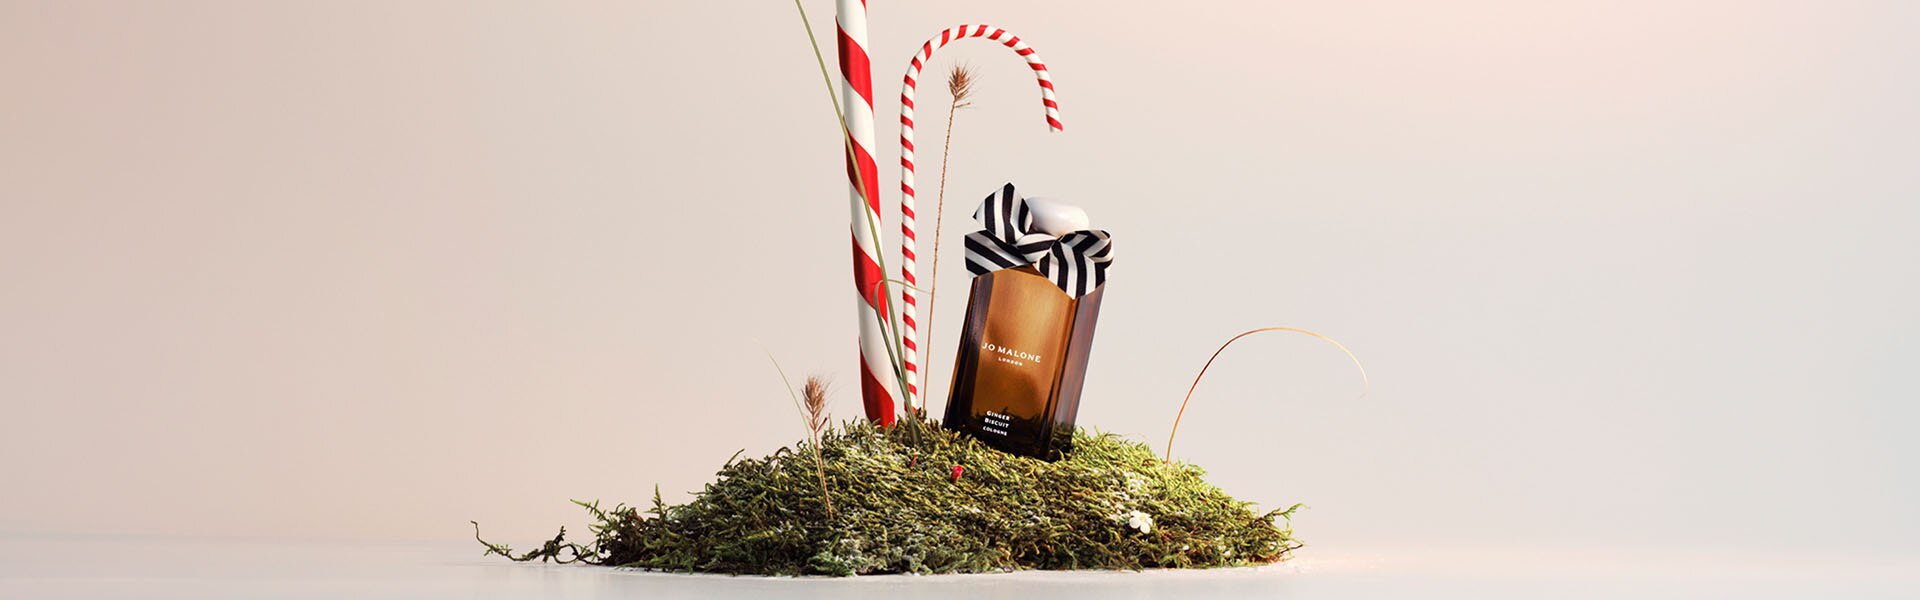 Jo Malone London Ginger Biscuit Collection Candle Cologne on a bed of moss with black and white bows